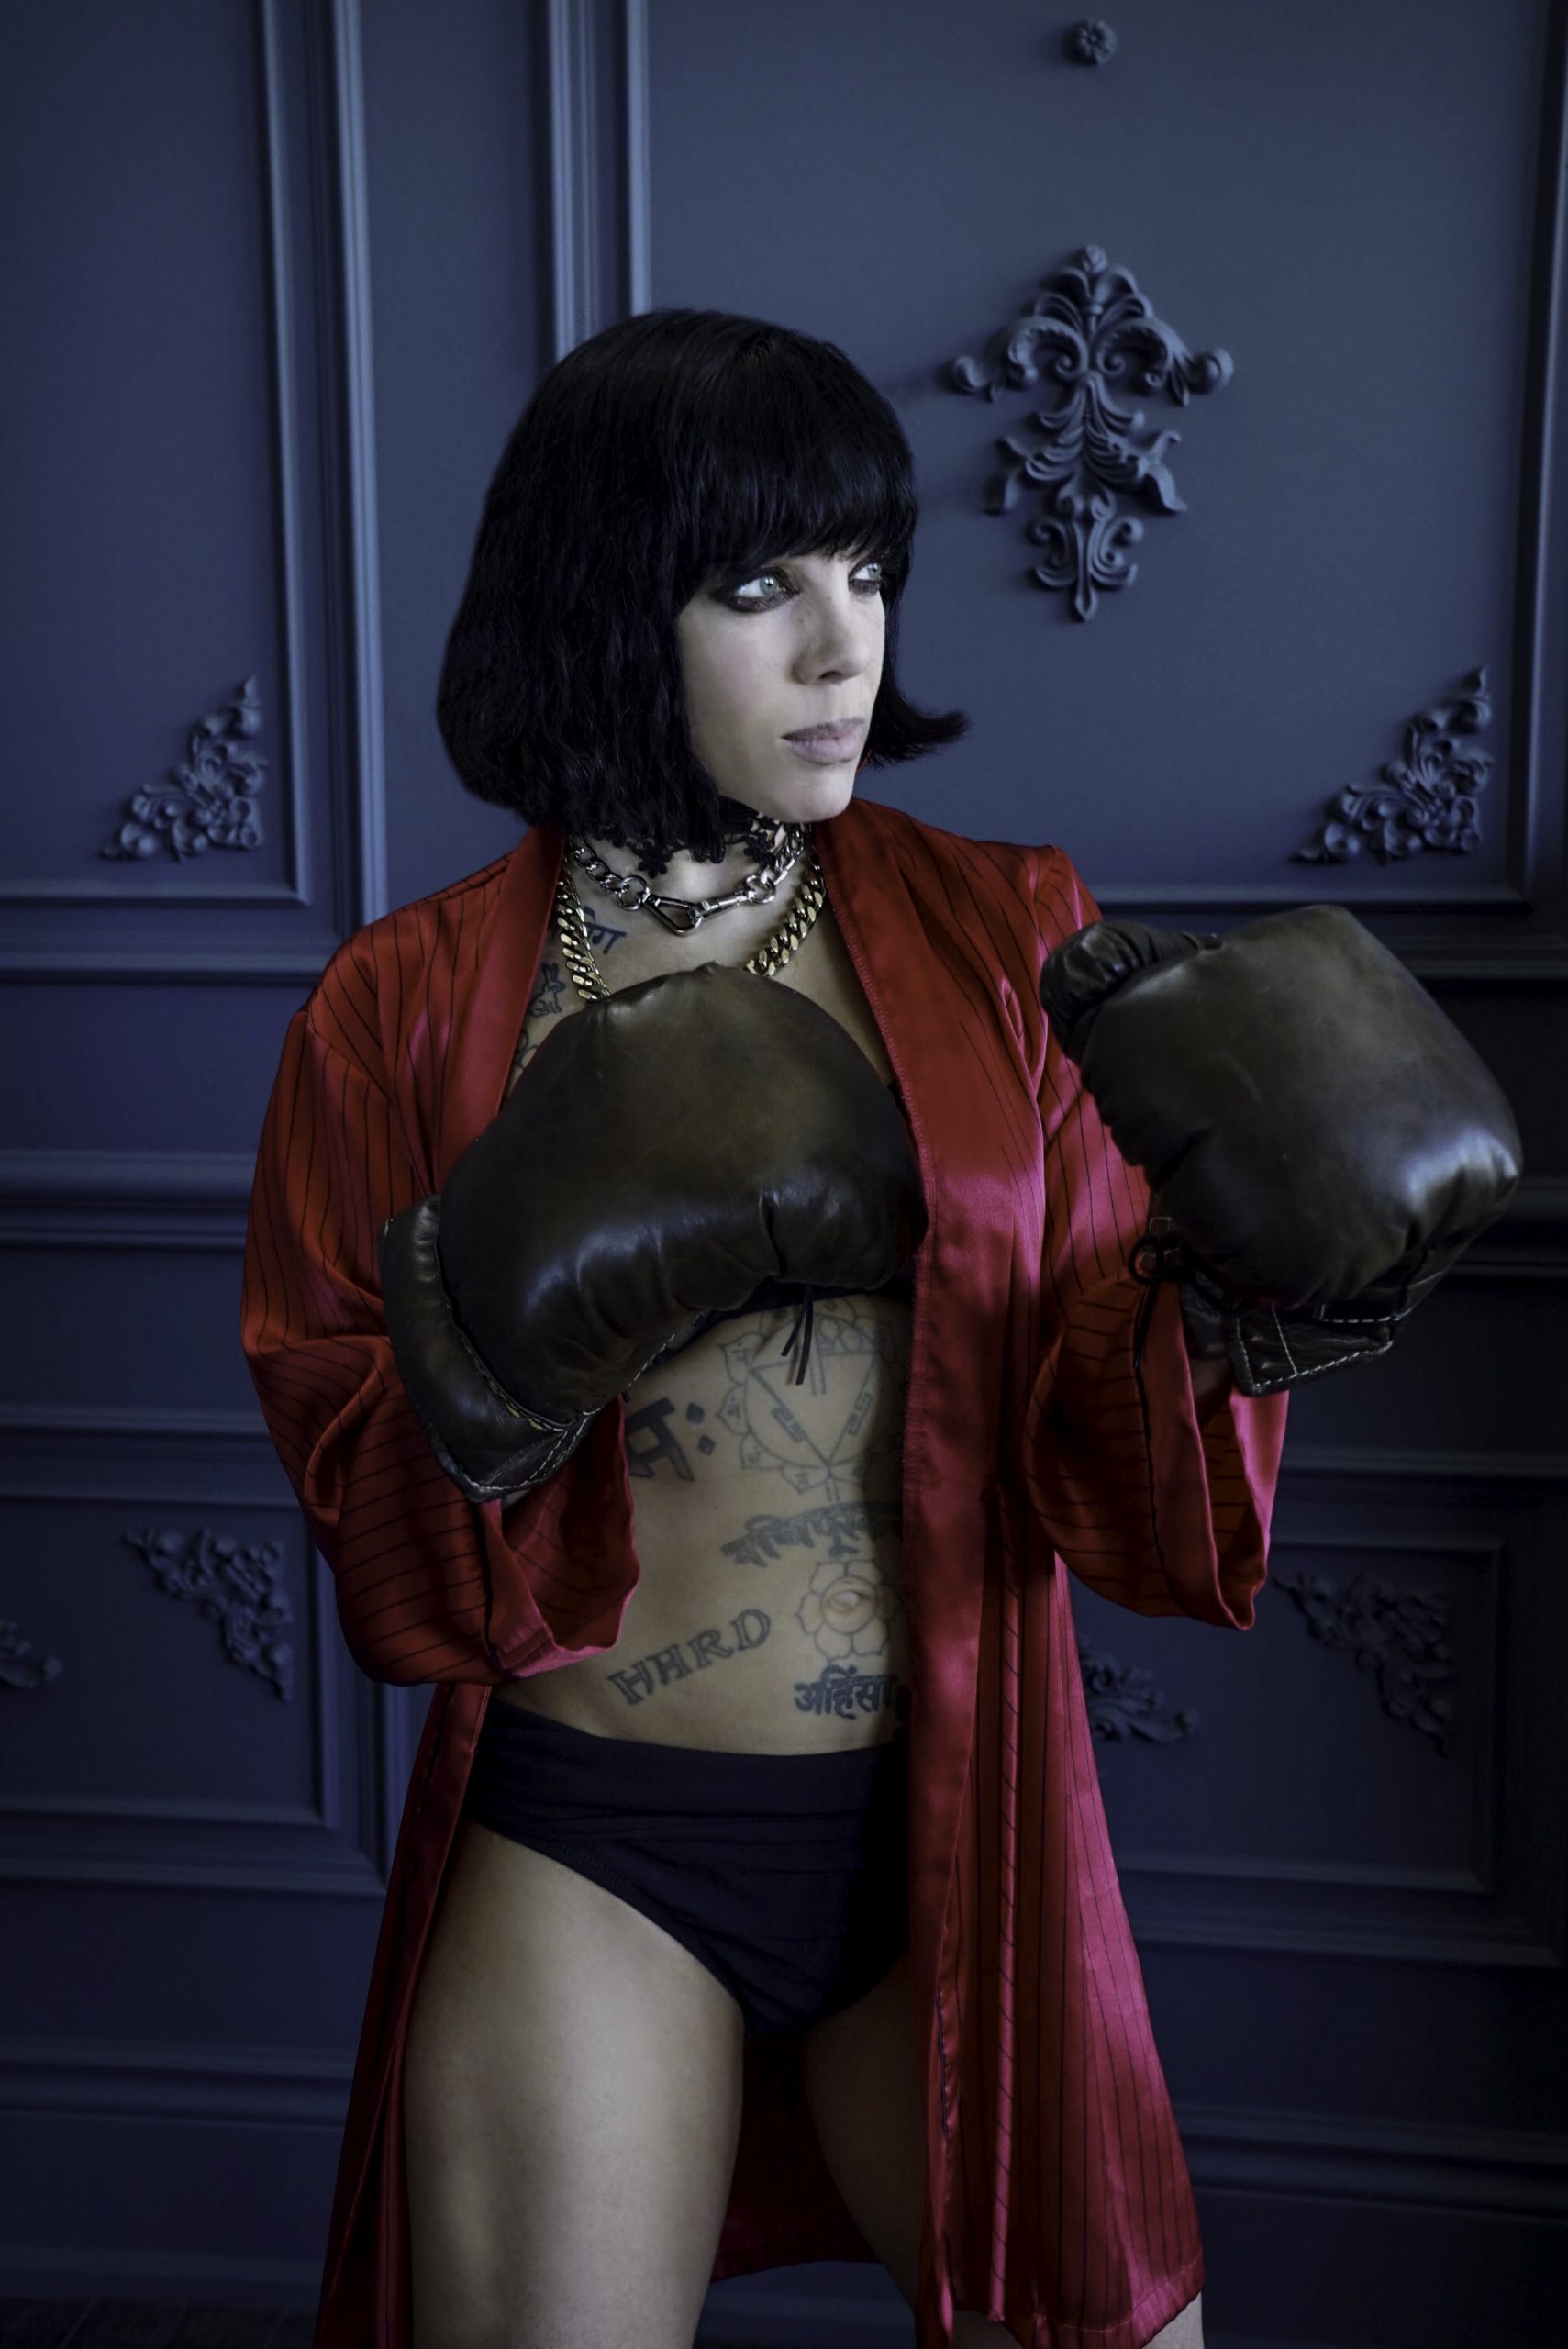 Bif naked returns to her roots